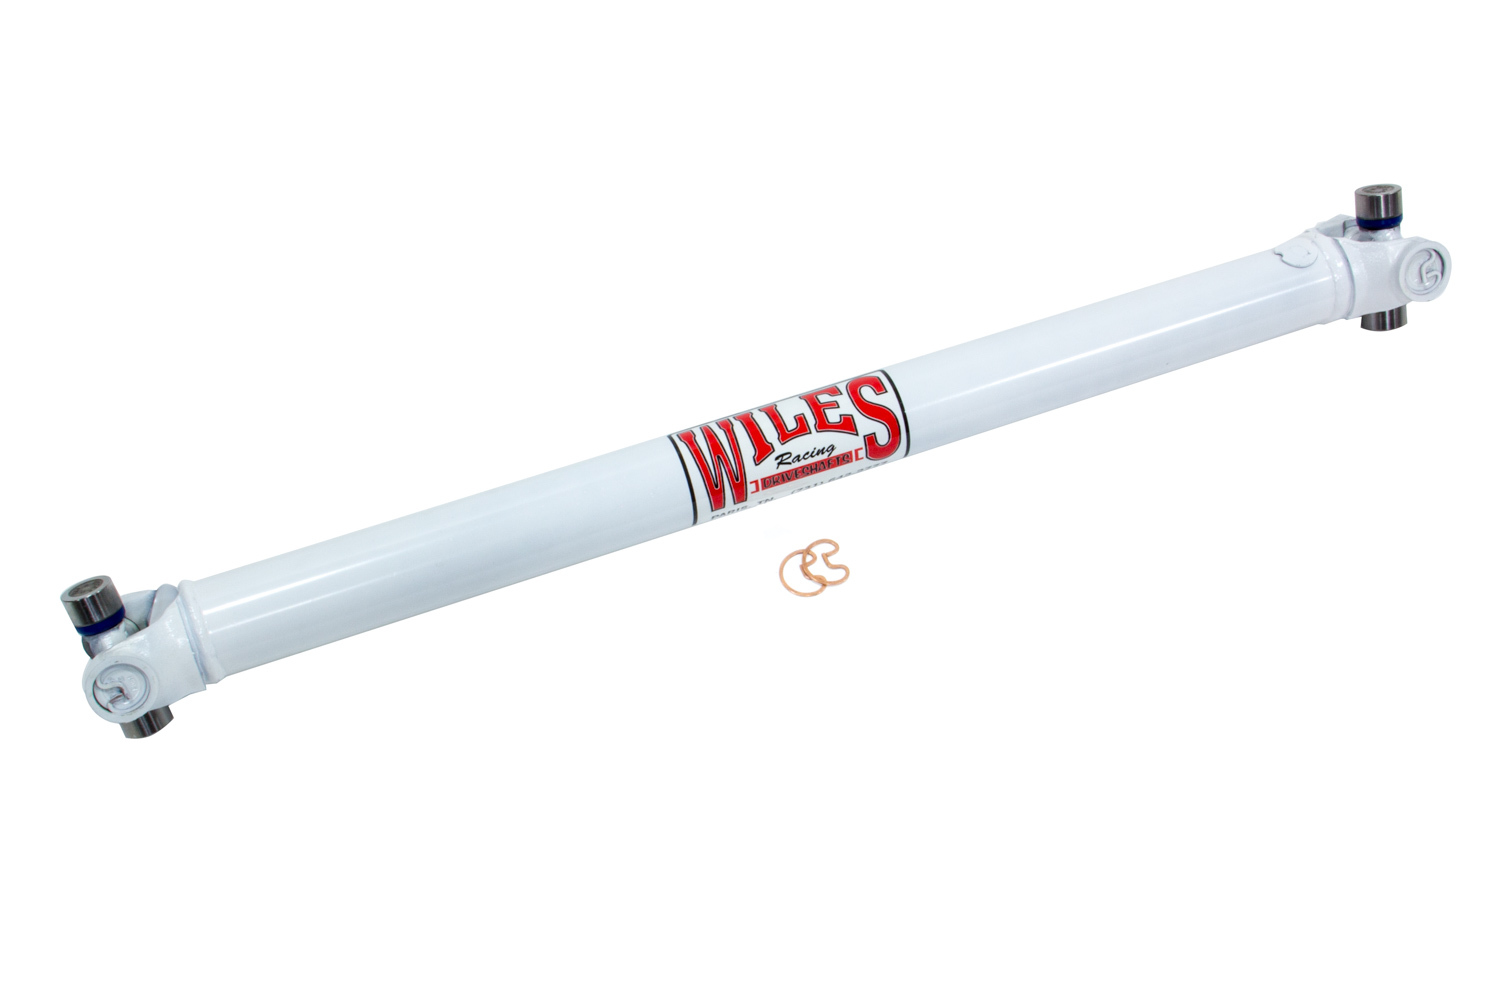 Wiles Driveshaft S295380 Drive Shaft, 38 in Long, 2 in OD, 1310 U-Joints, Steel, White Paint, Universal, Each